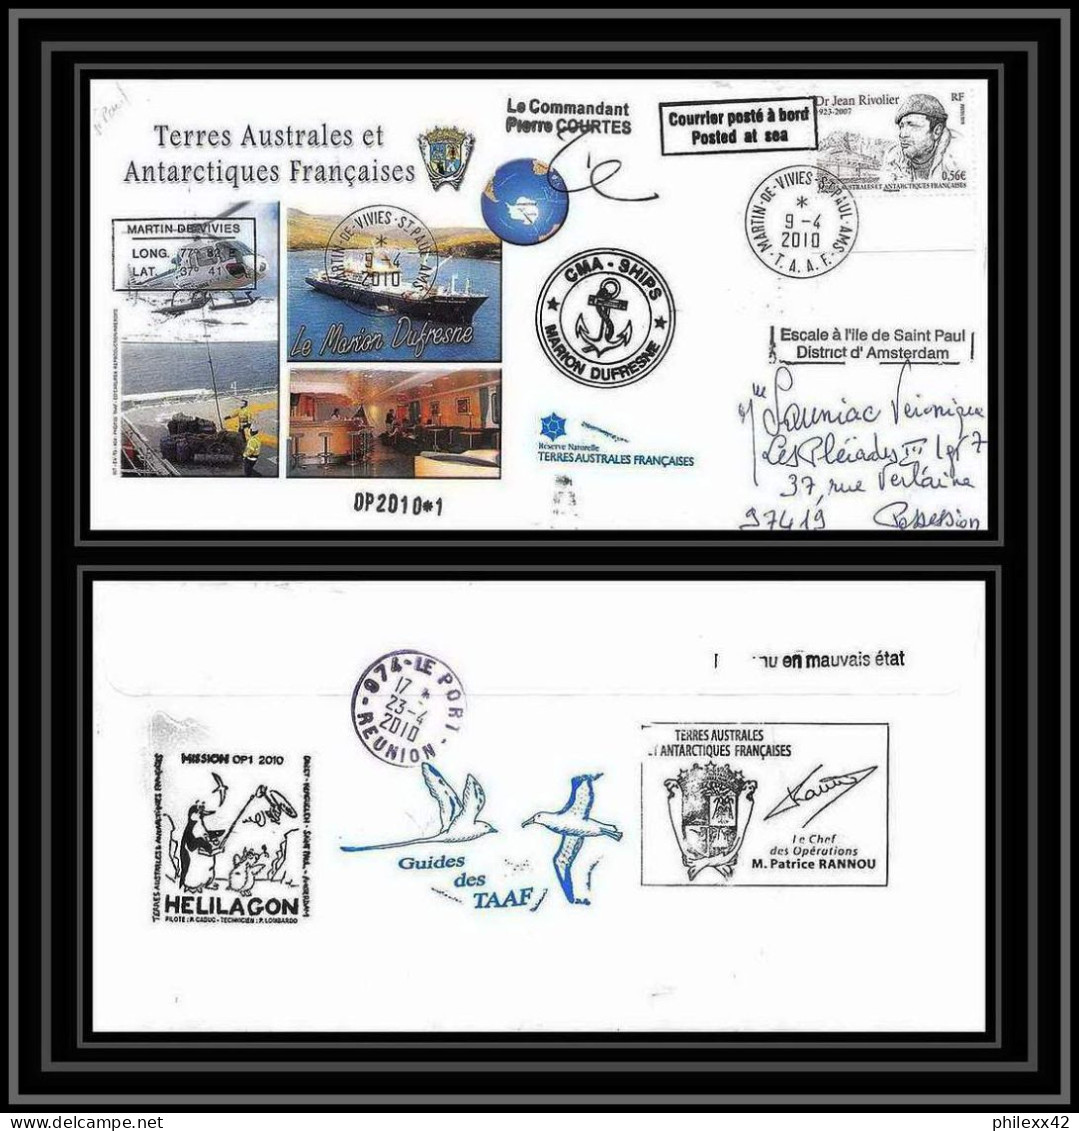 2997 Helilagon Terres Australes TAAF Lettre Cover Dufresne 2 Signé Signed St Paul Op 2010/1 9/4/2010 N°557 - Helikopters